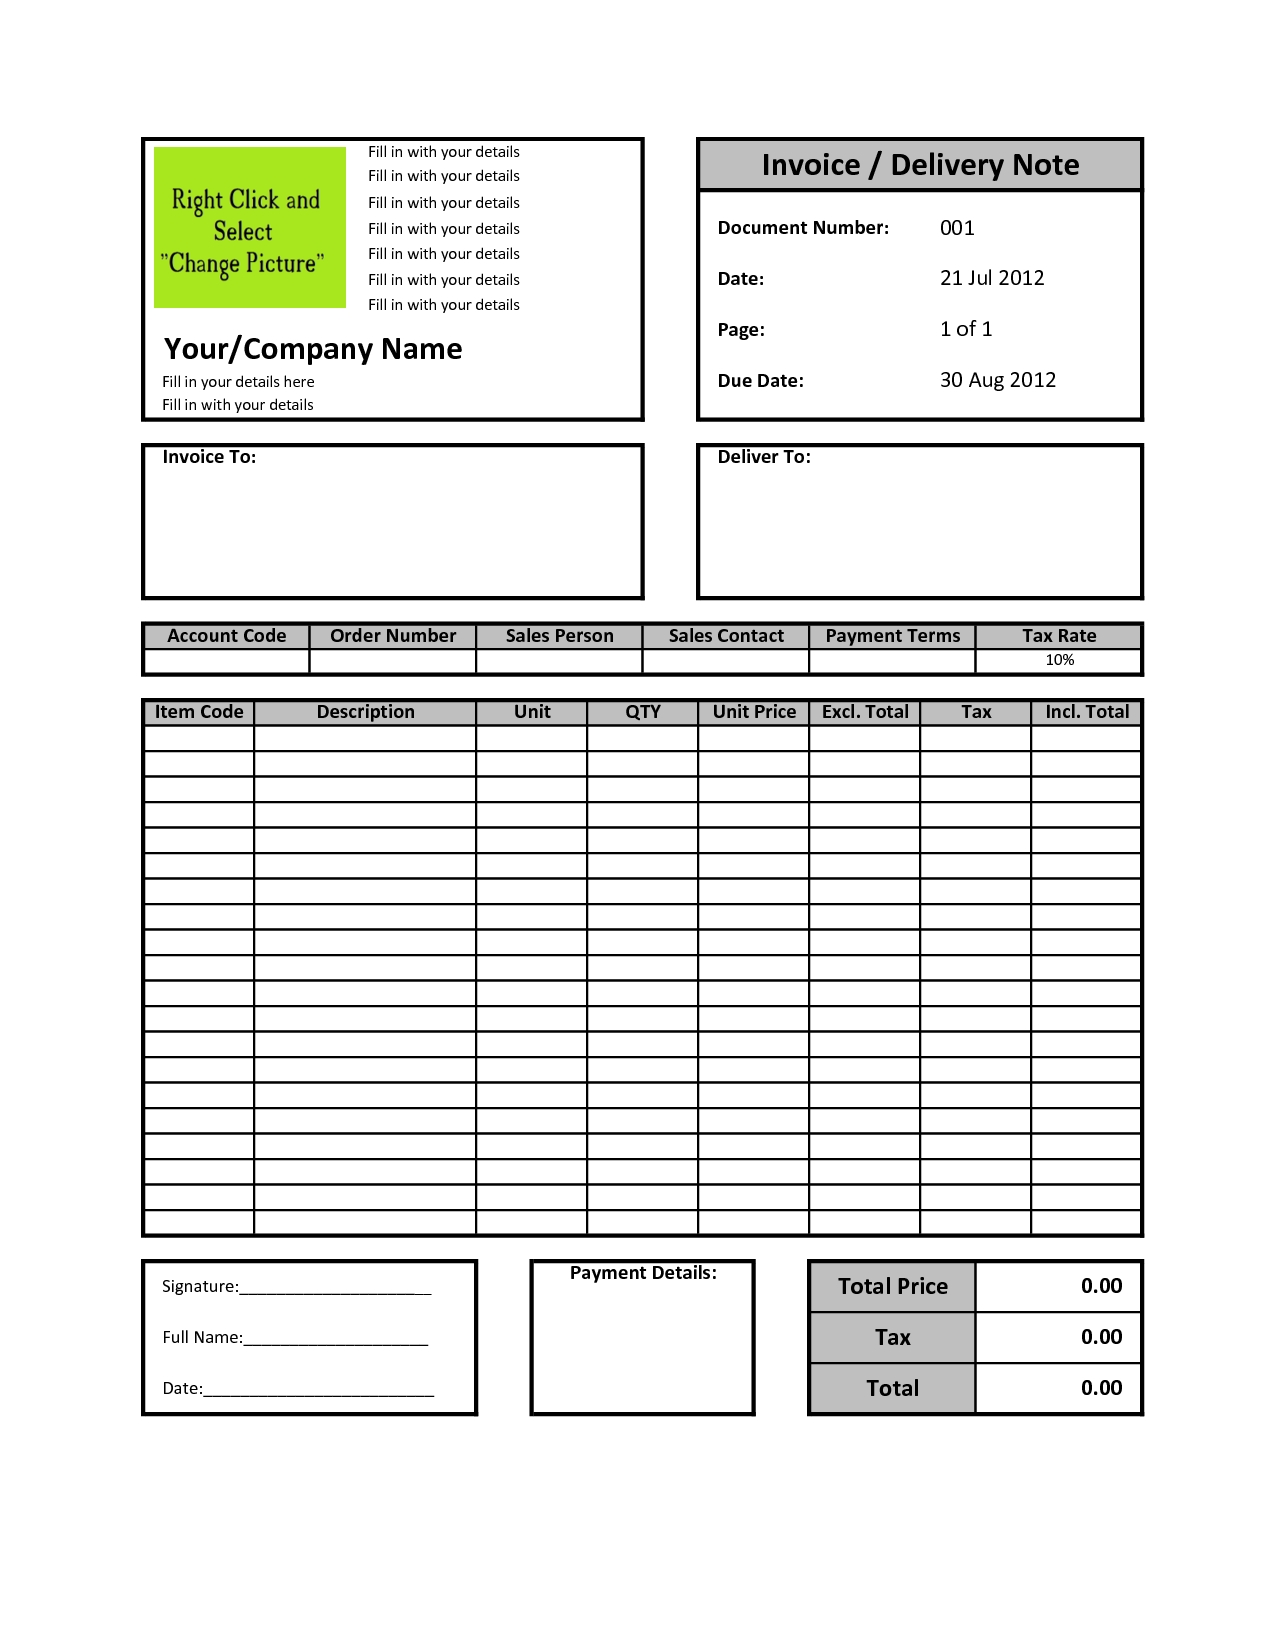 invoice excel template free download 10 excel invoice template sample and steps to create excel invoice 1275 X 1650